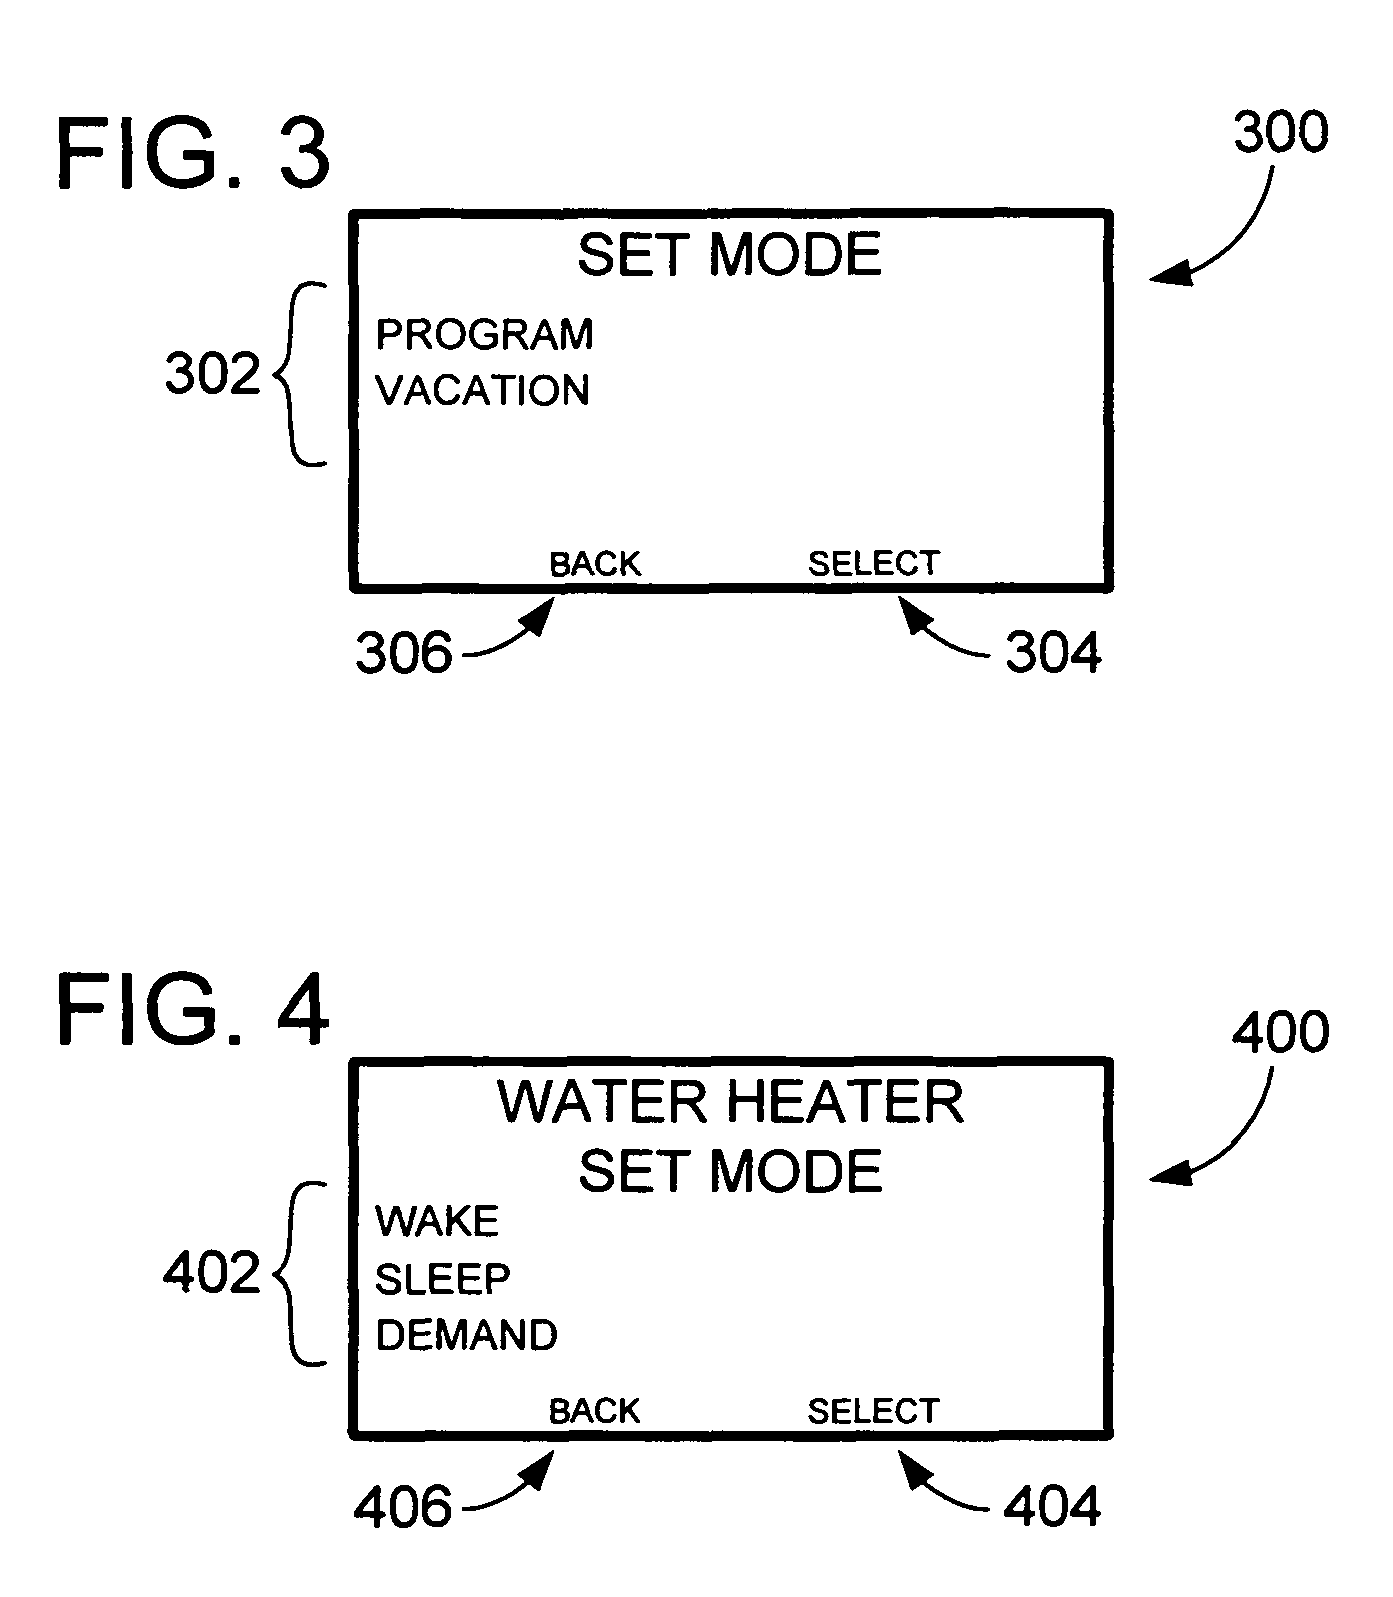 System and method for reducing energy consumption by controlling a water heater and HVAC system via a thermostat and thermostat for use therewith